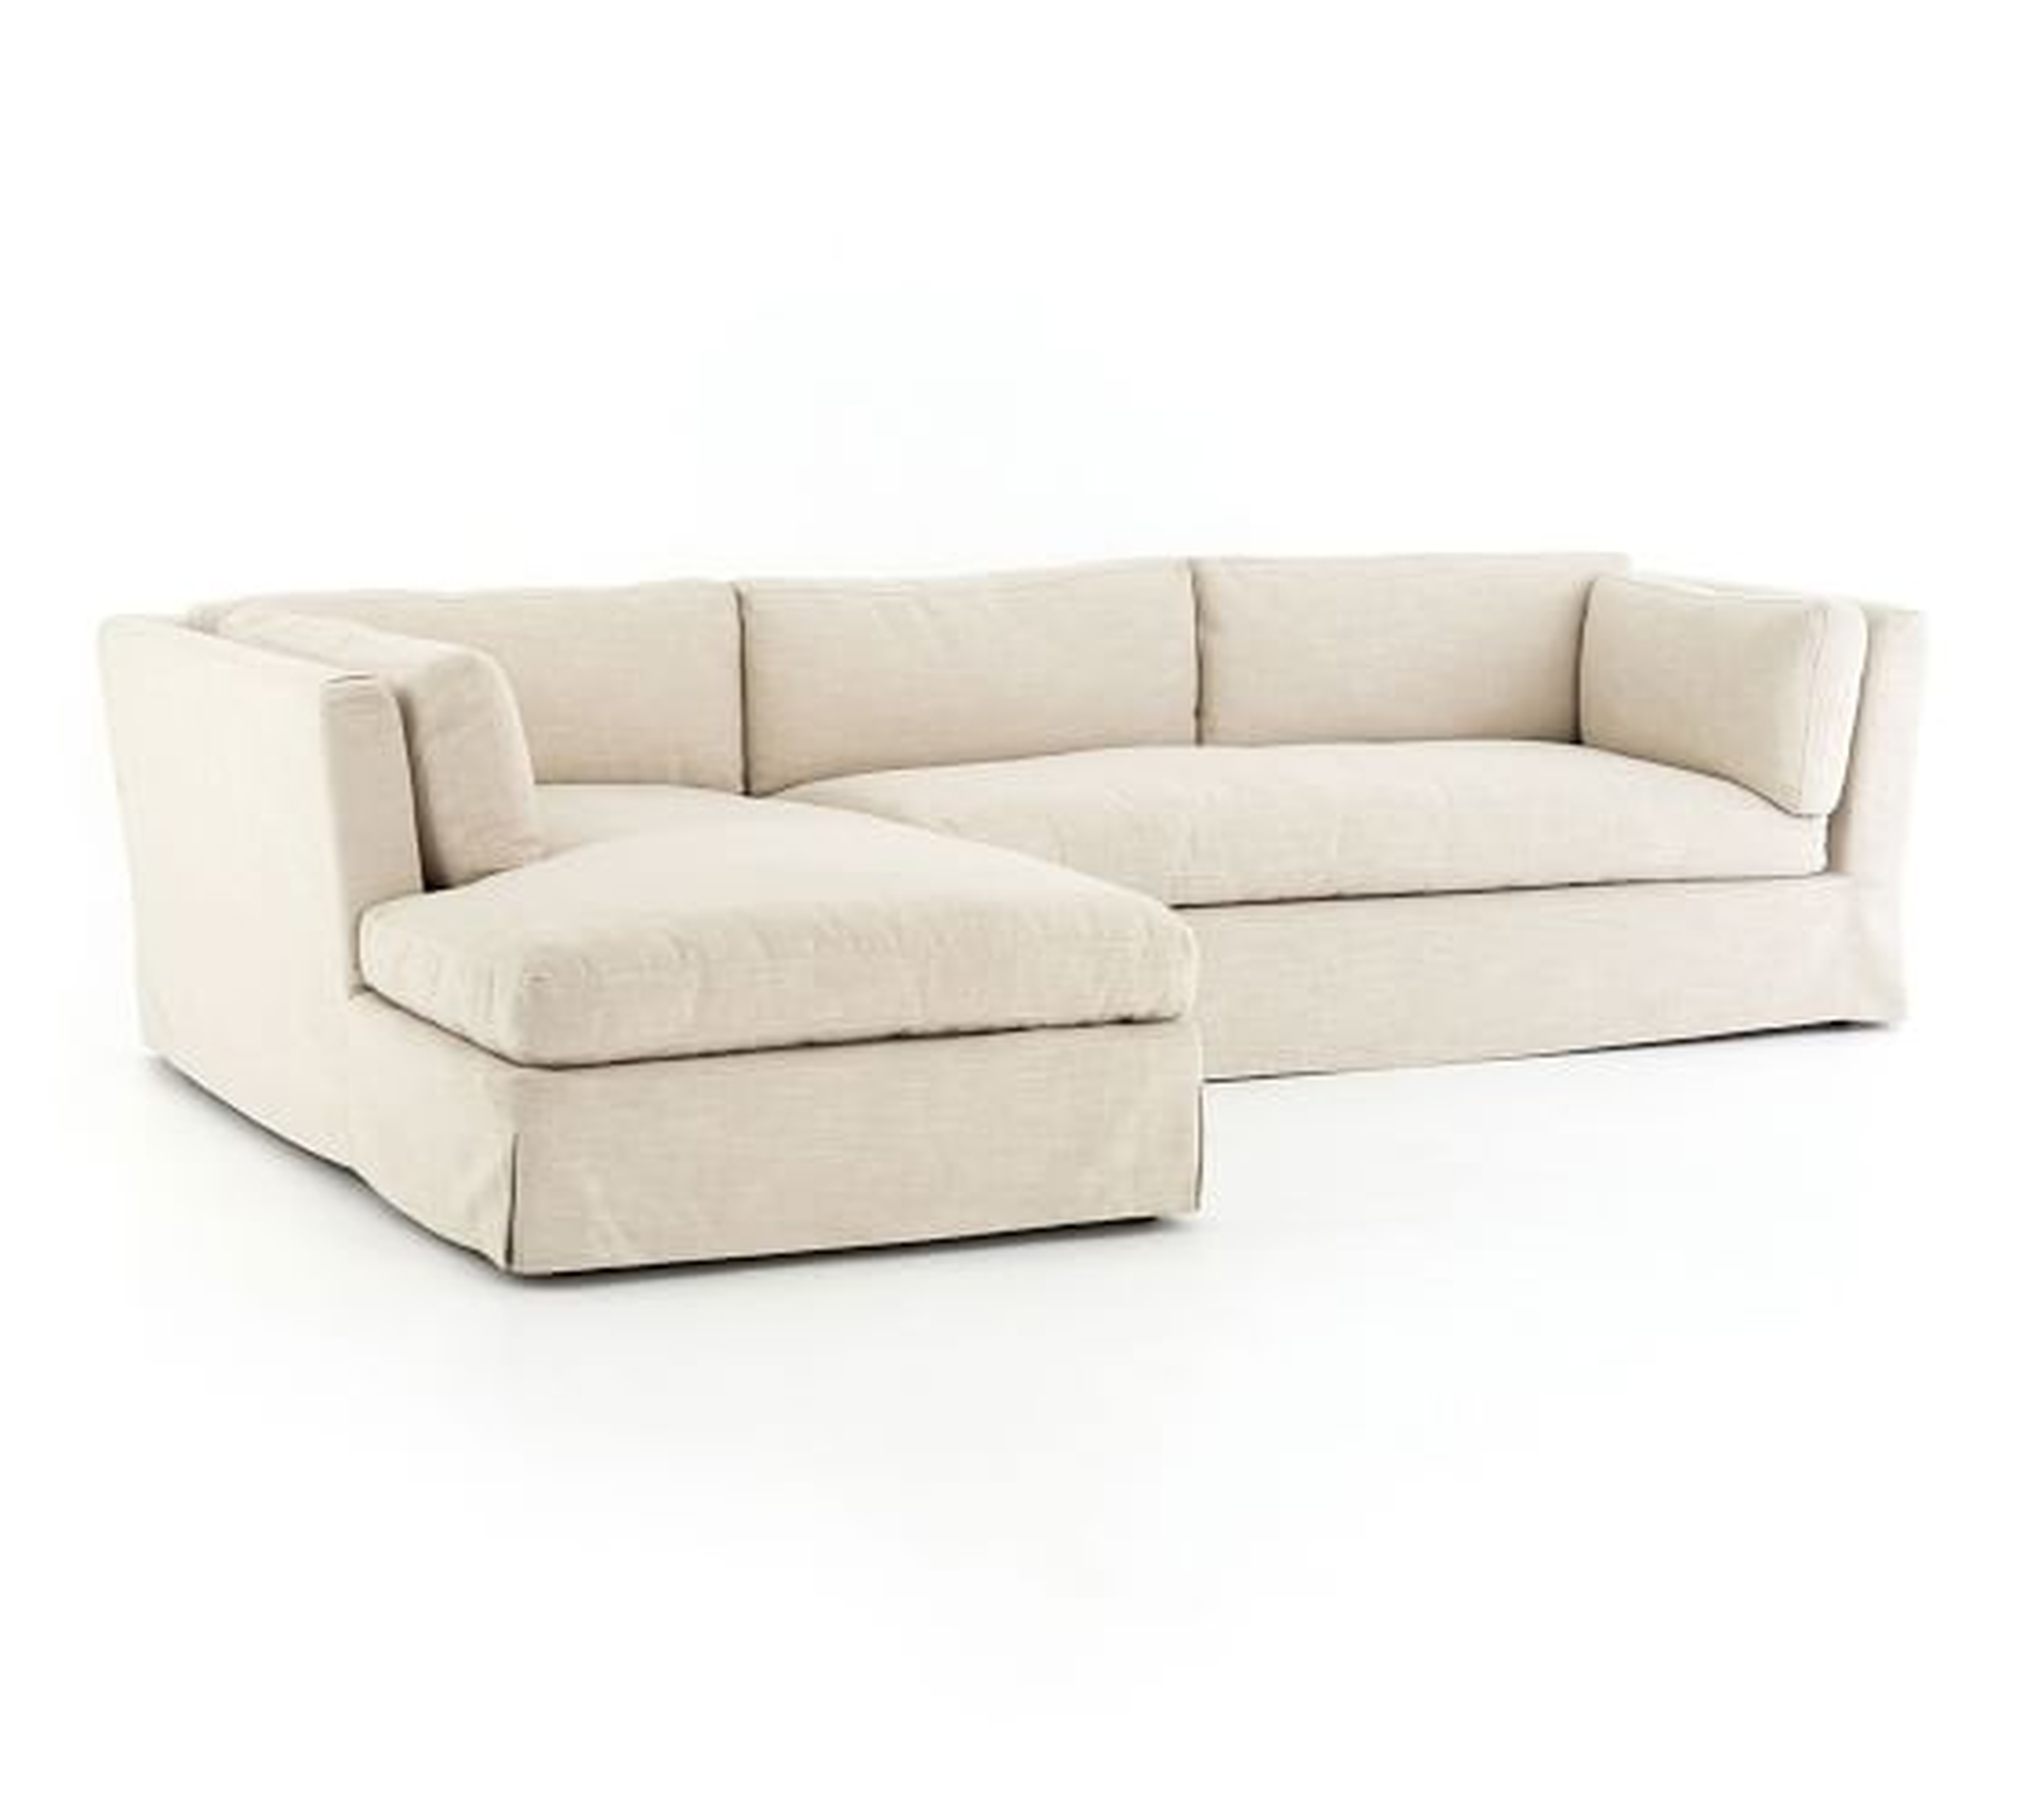 Dawn Slipcovered Right Arm Sofa with Left Chaise Sectional - Pottery Barn